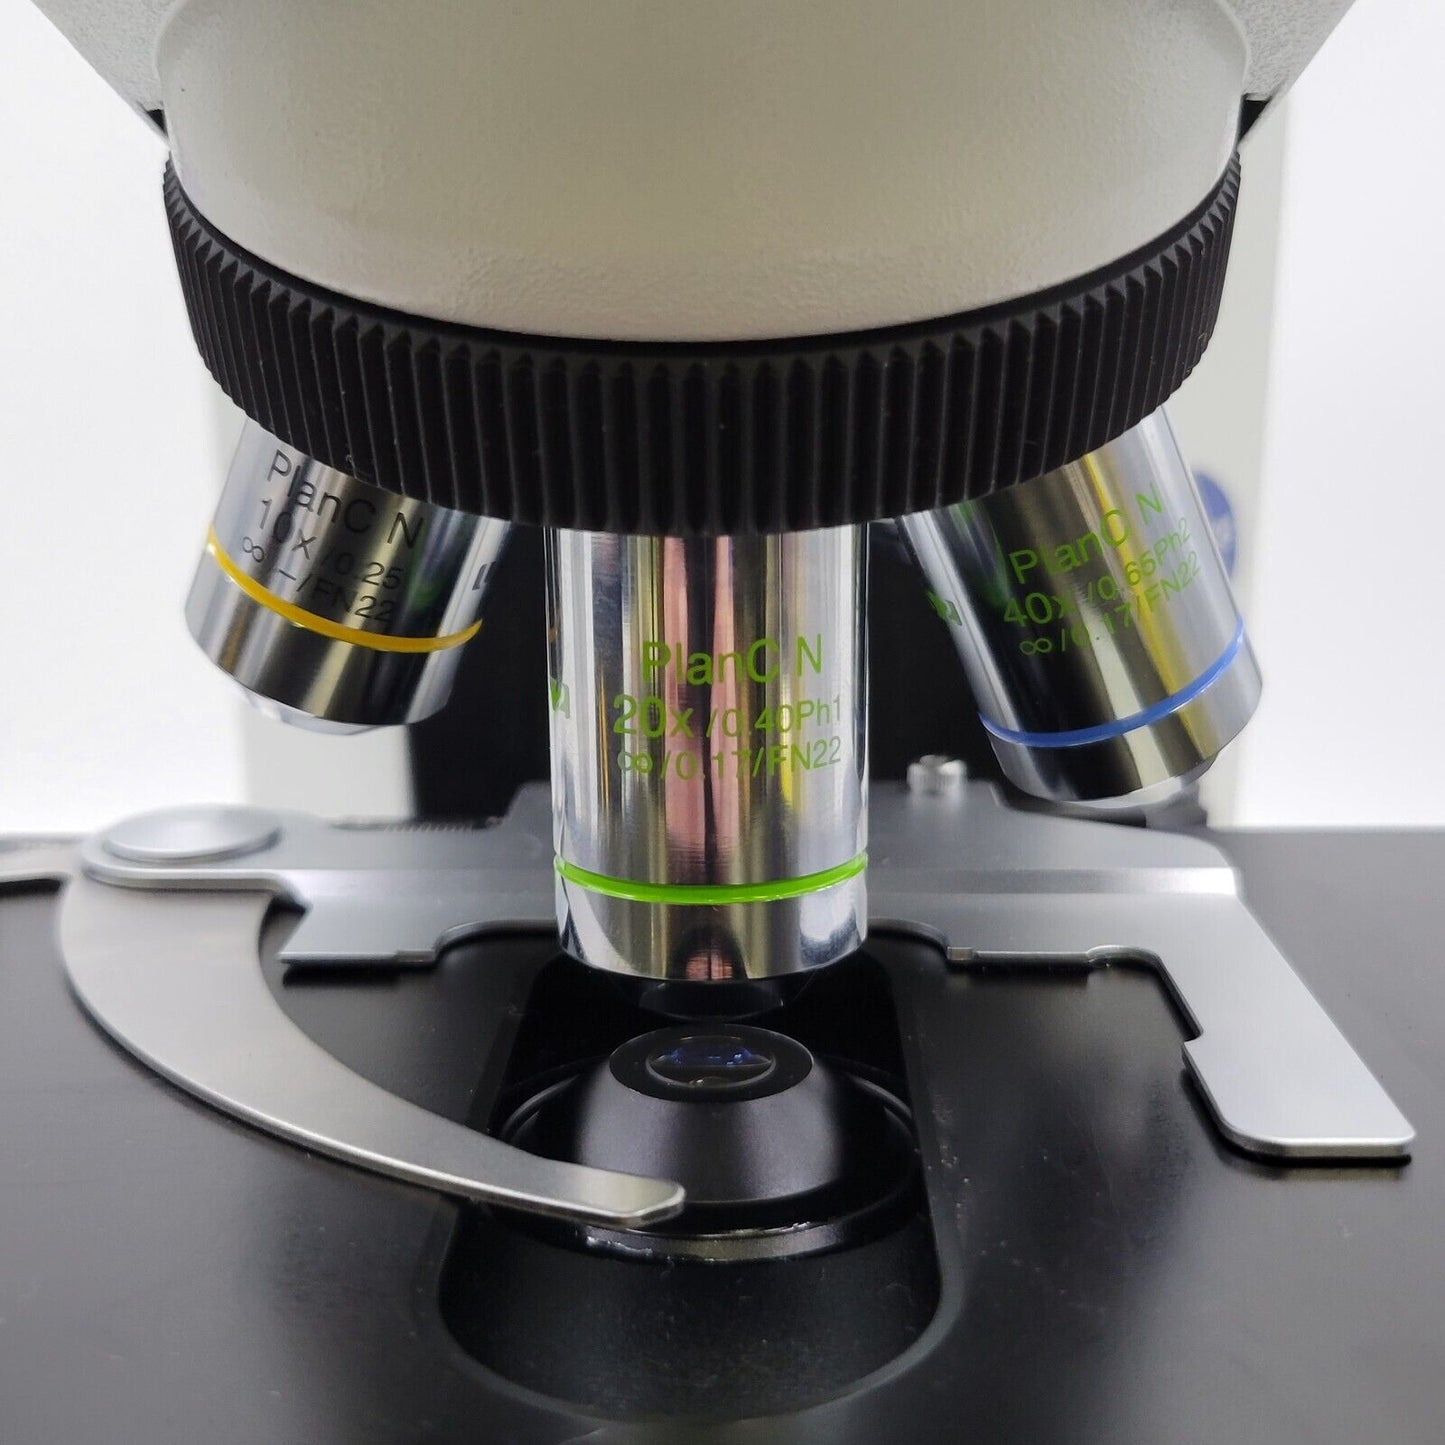 Olympus Microscope CX41 with Phase Contrast & Darkfield for Live Blood Analysis - microscopemarketplace